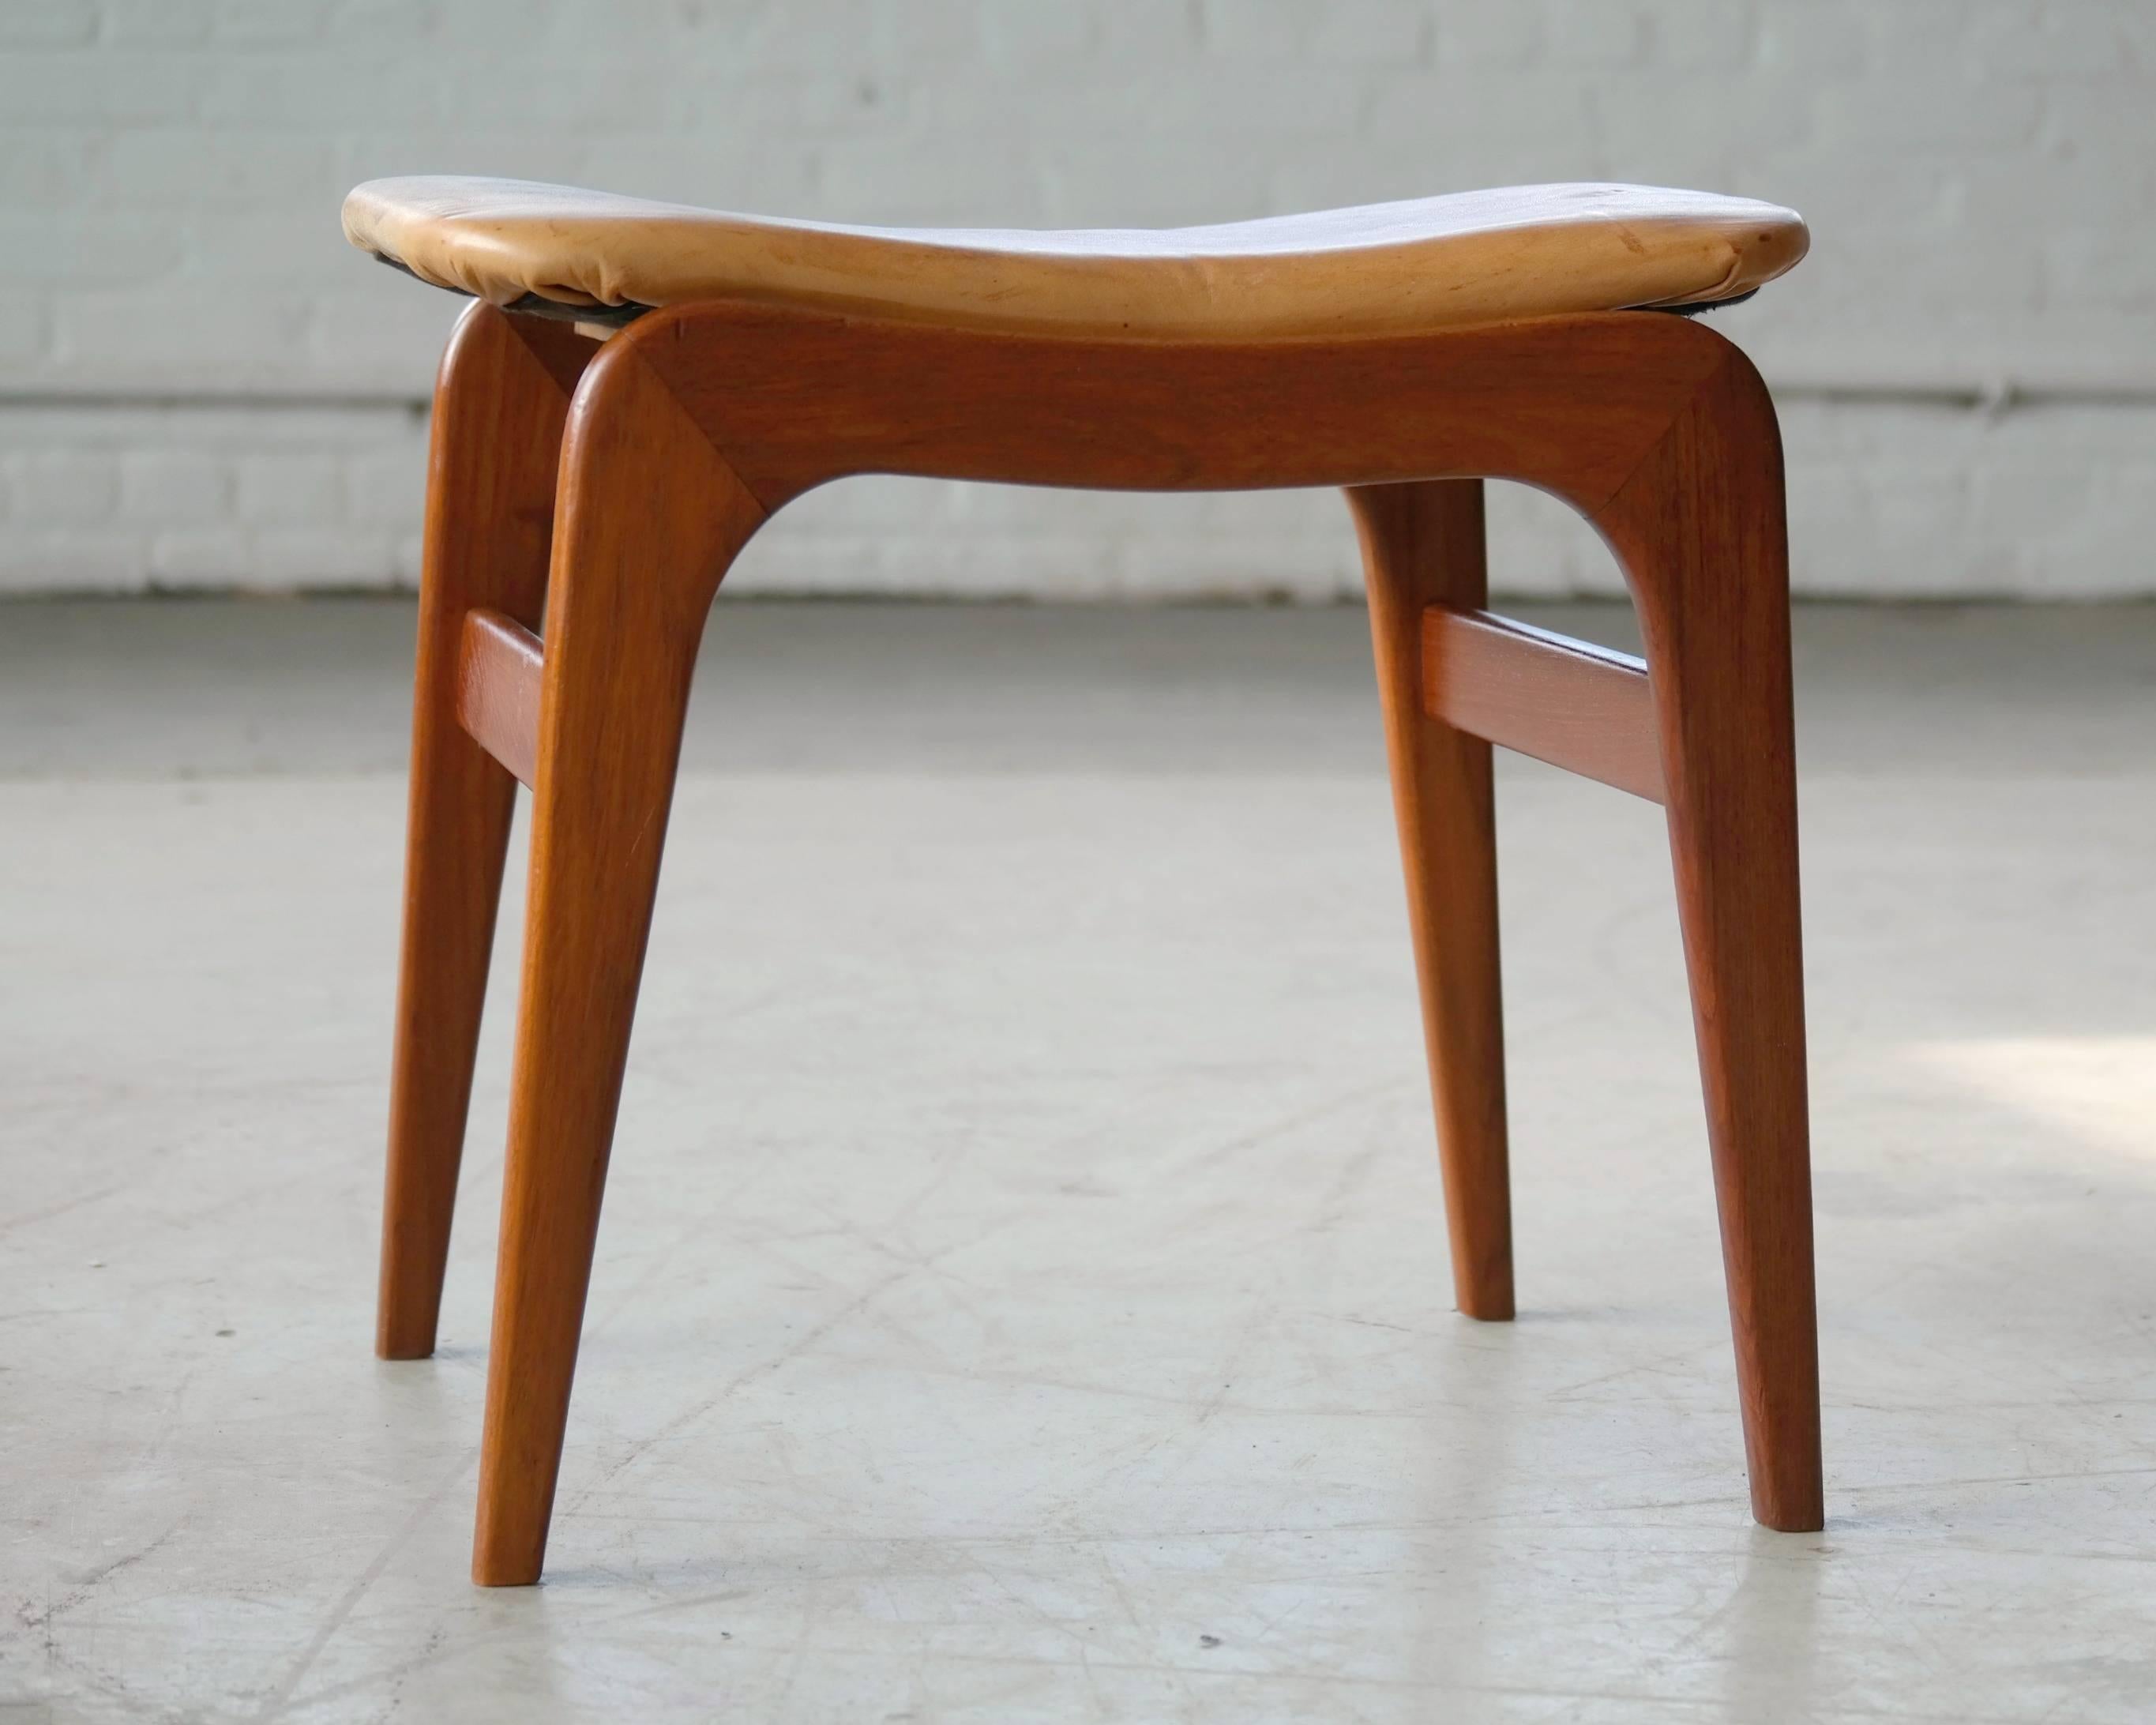 Danish Mid-Century footstool in teak and tan leather style of Fritz Hansen. The tan or cognac leather shows an admirable patina and a strong expression of wear, in the form of spots and marks which brightens up the natural leather.